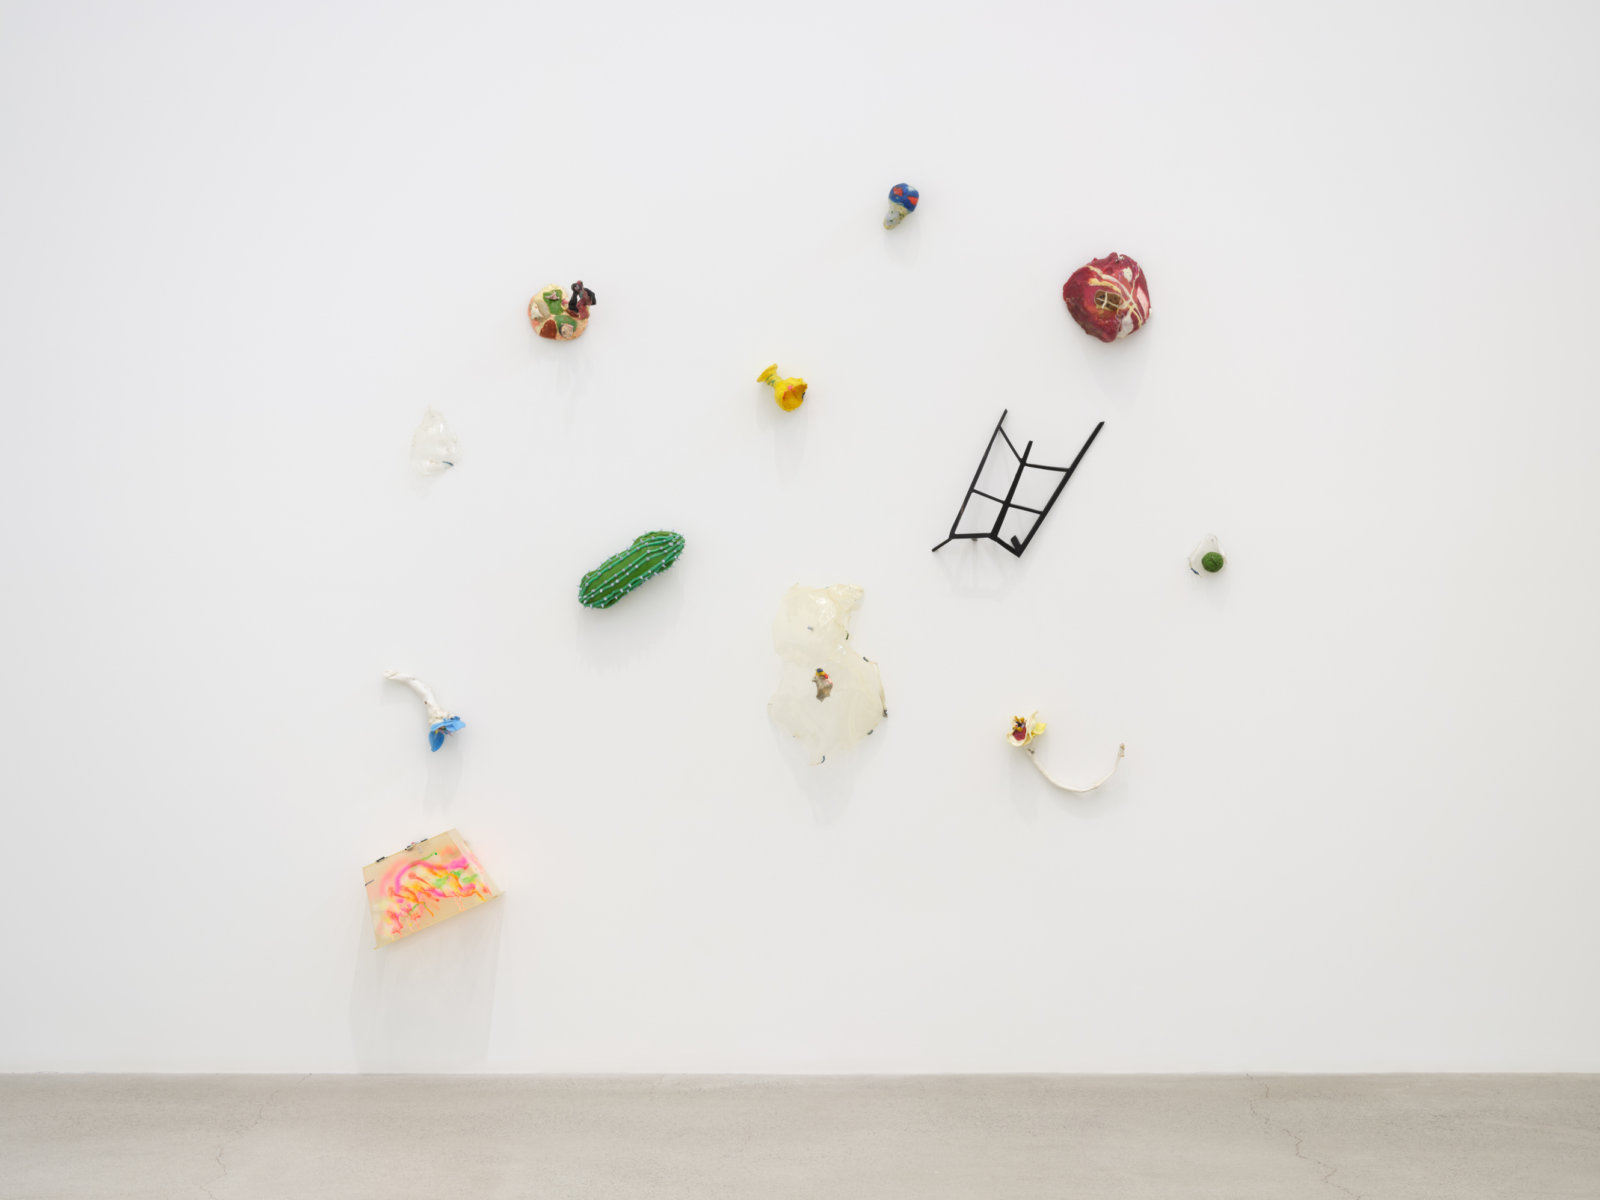 Jerry Pethick, Desert Flowers, Cactus and Skylight (exploded sculpture), 1965, mixed plastics, paint, 82 x 92 3/8 x 7 1/8 in. (208 x 235 x 18 cm)